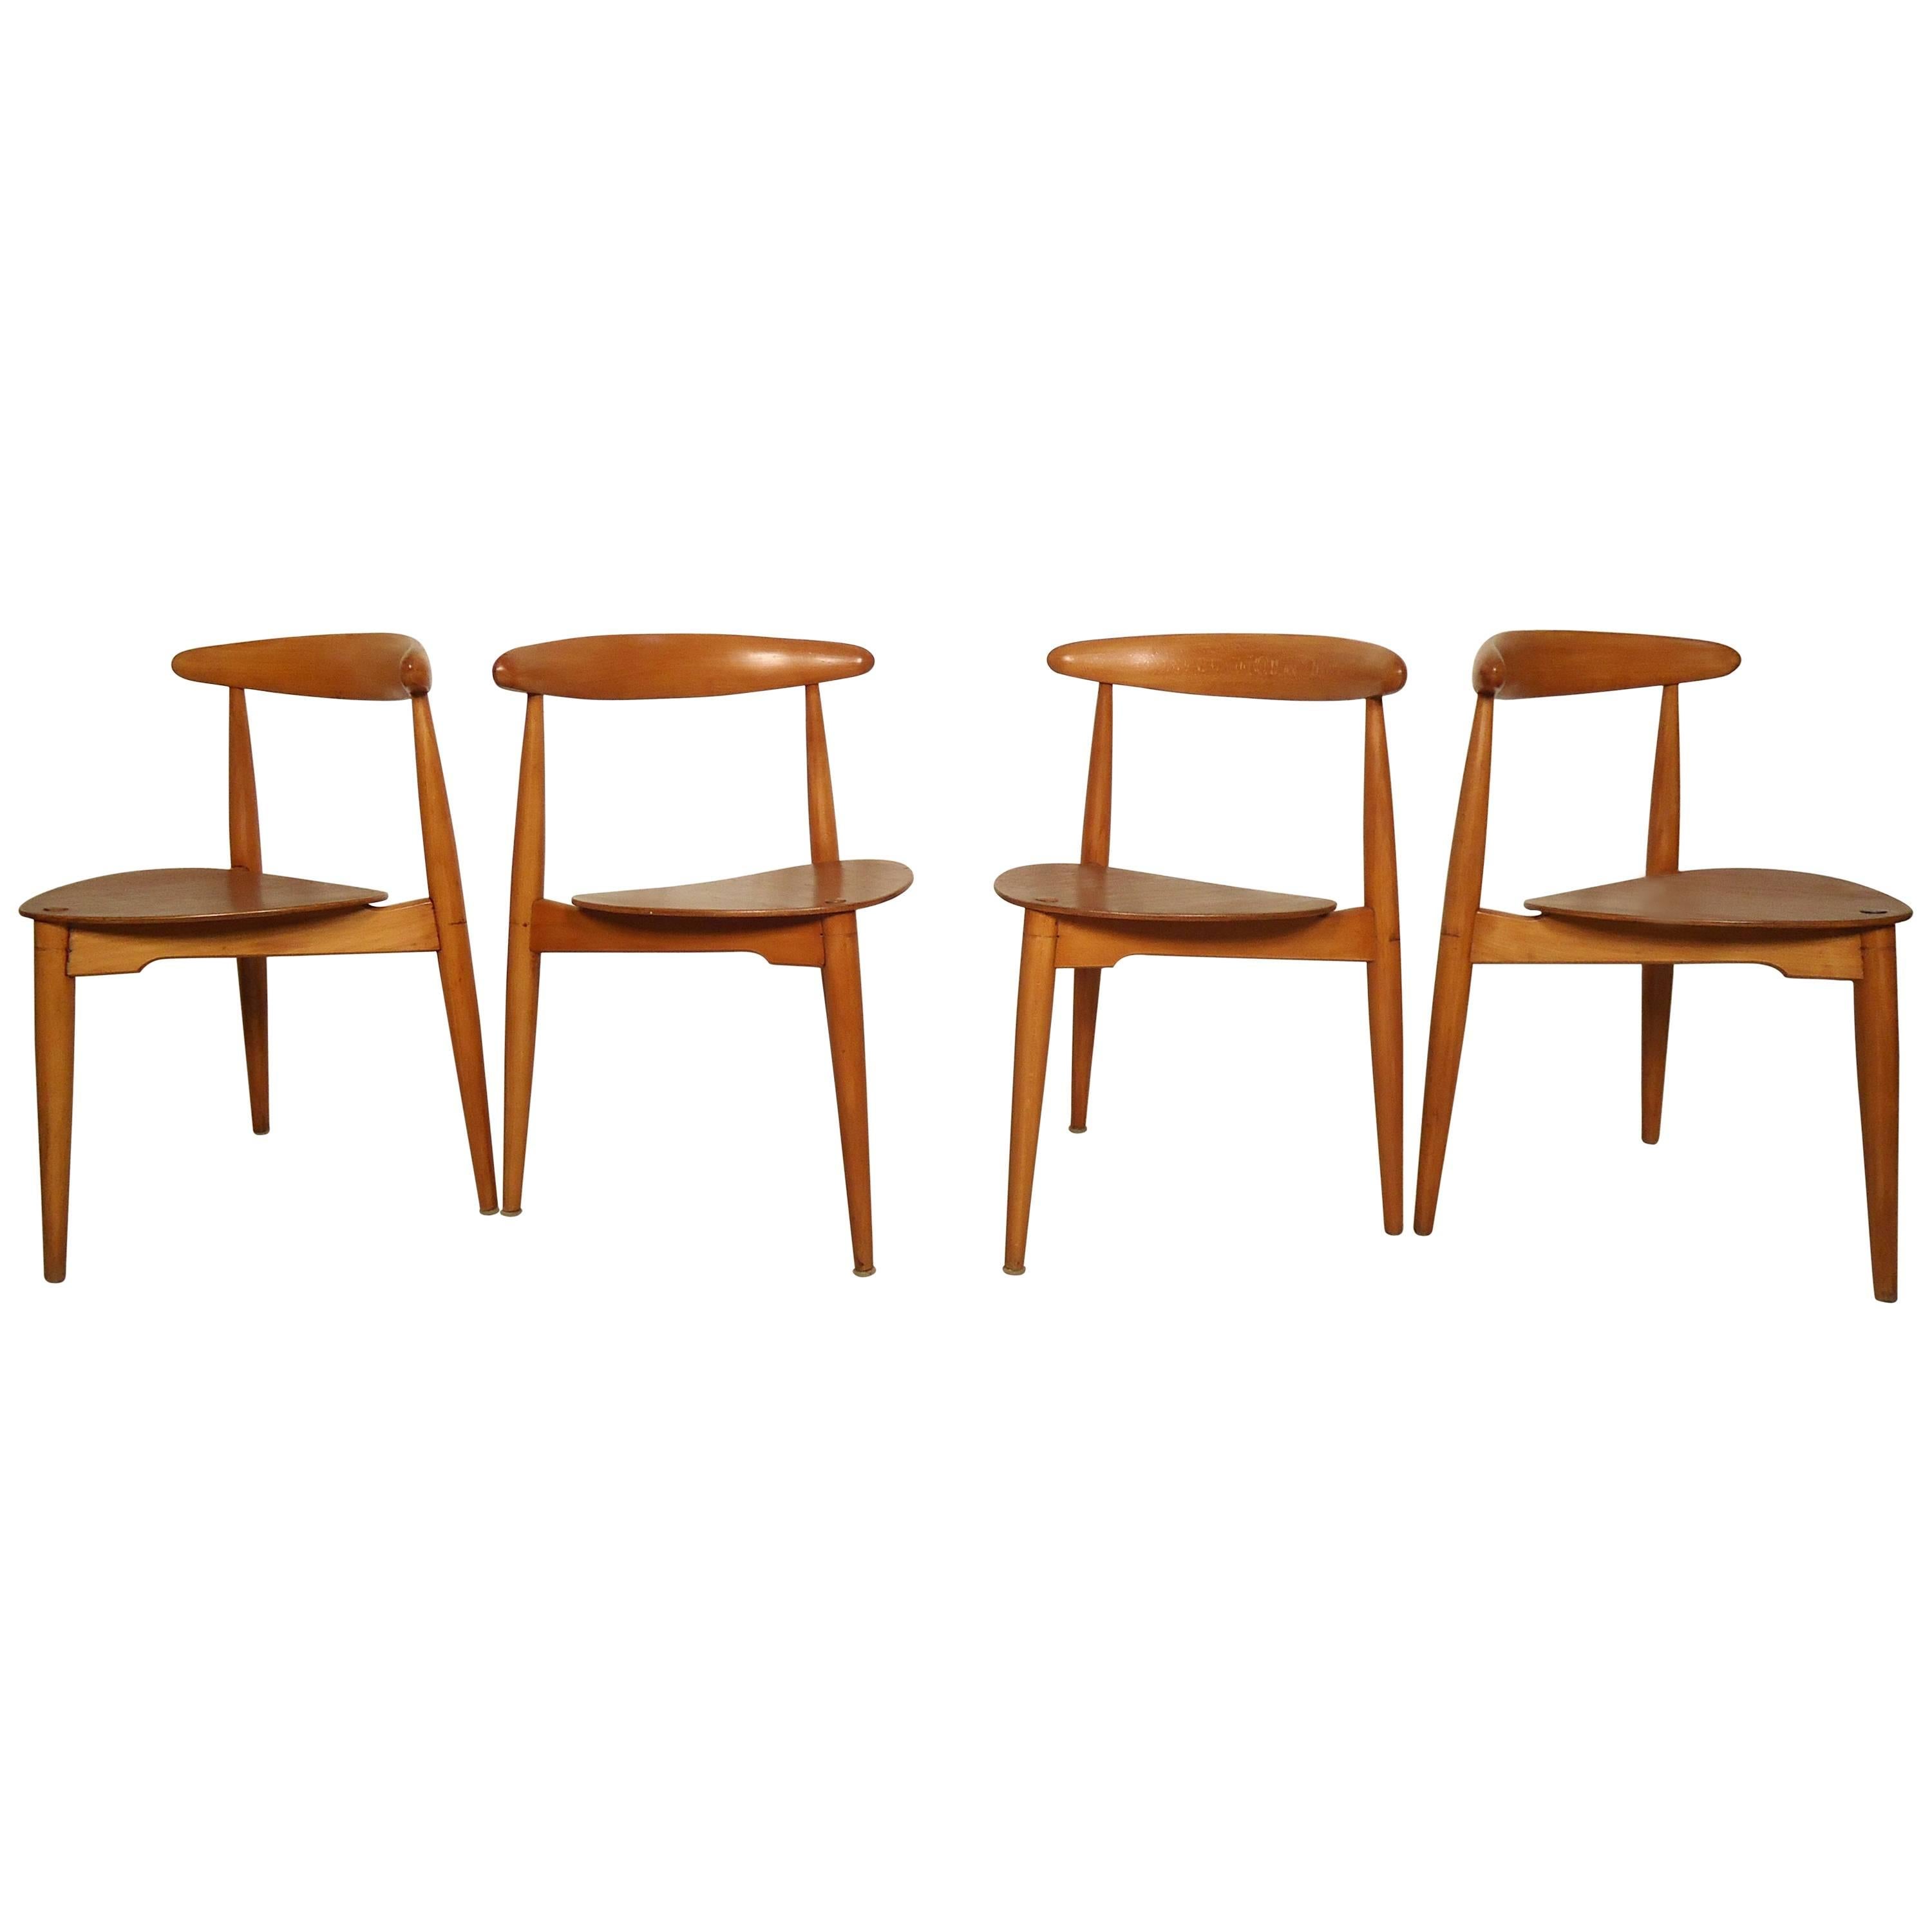 Set of Four Mid-Century Modern Chairs